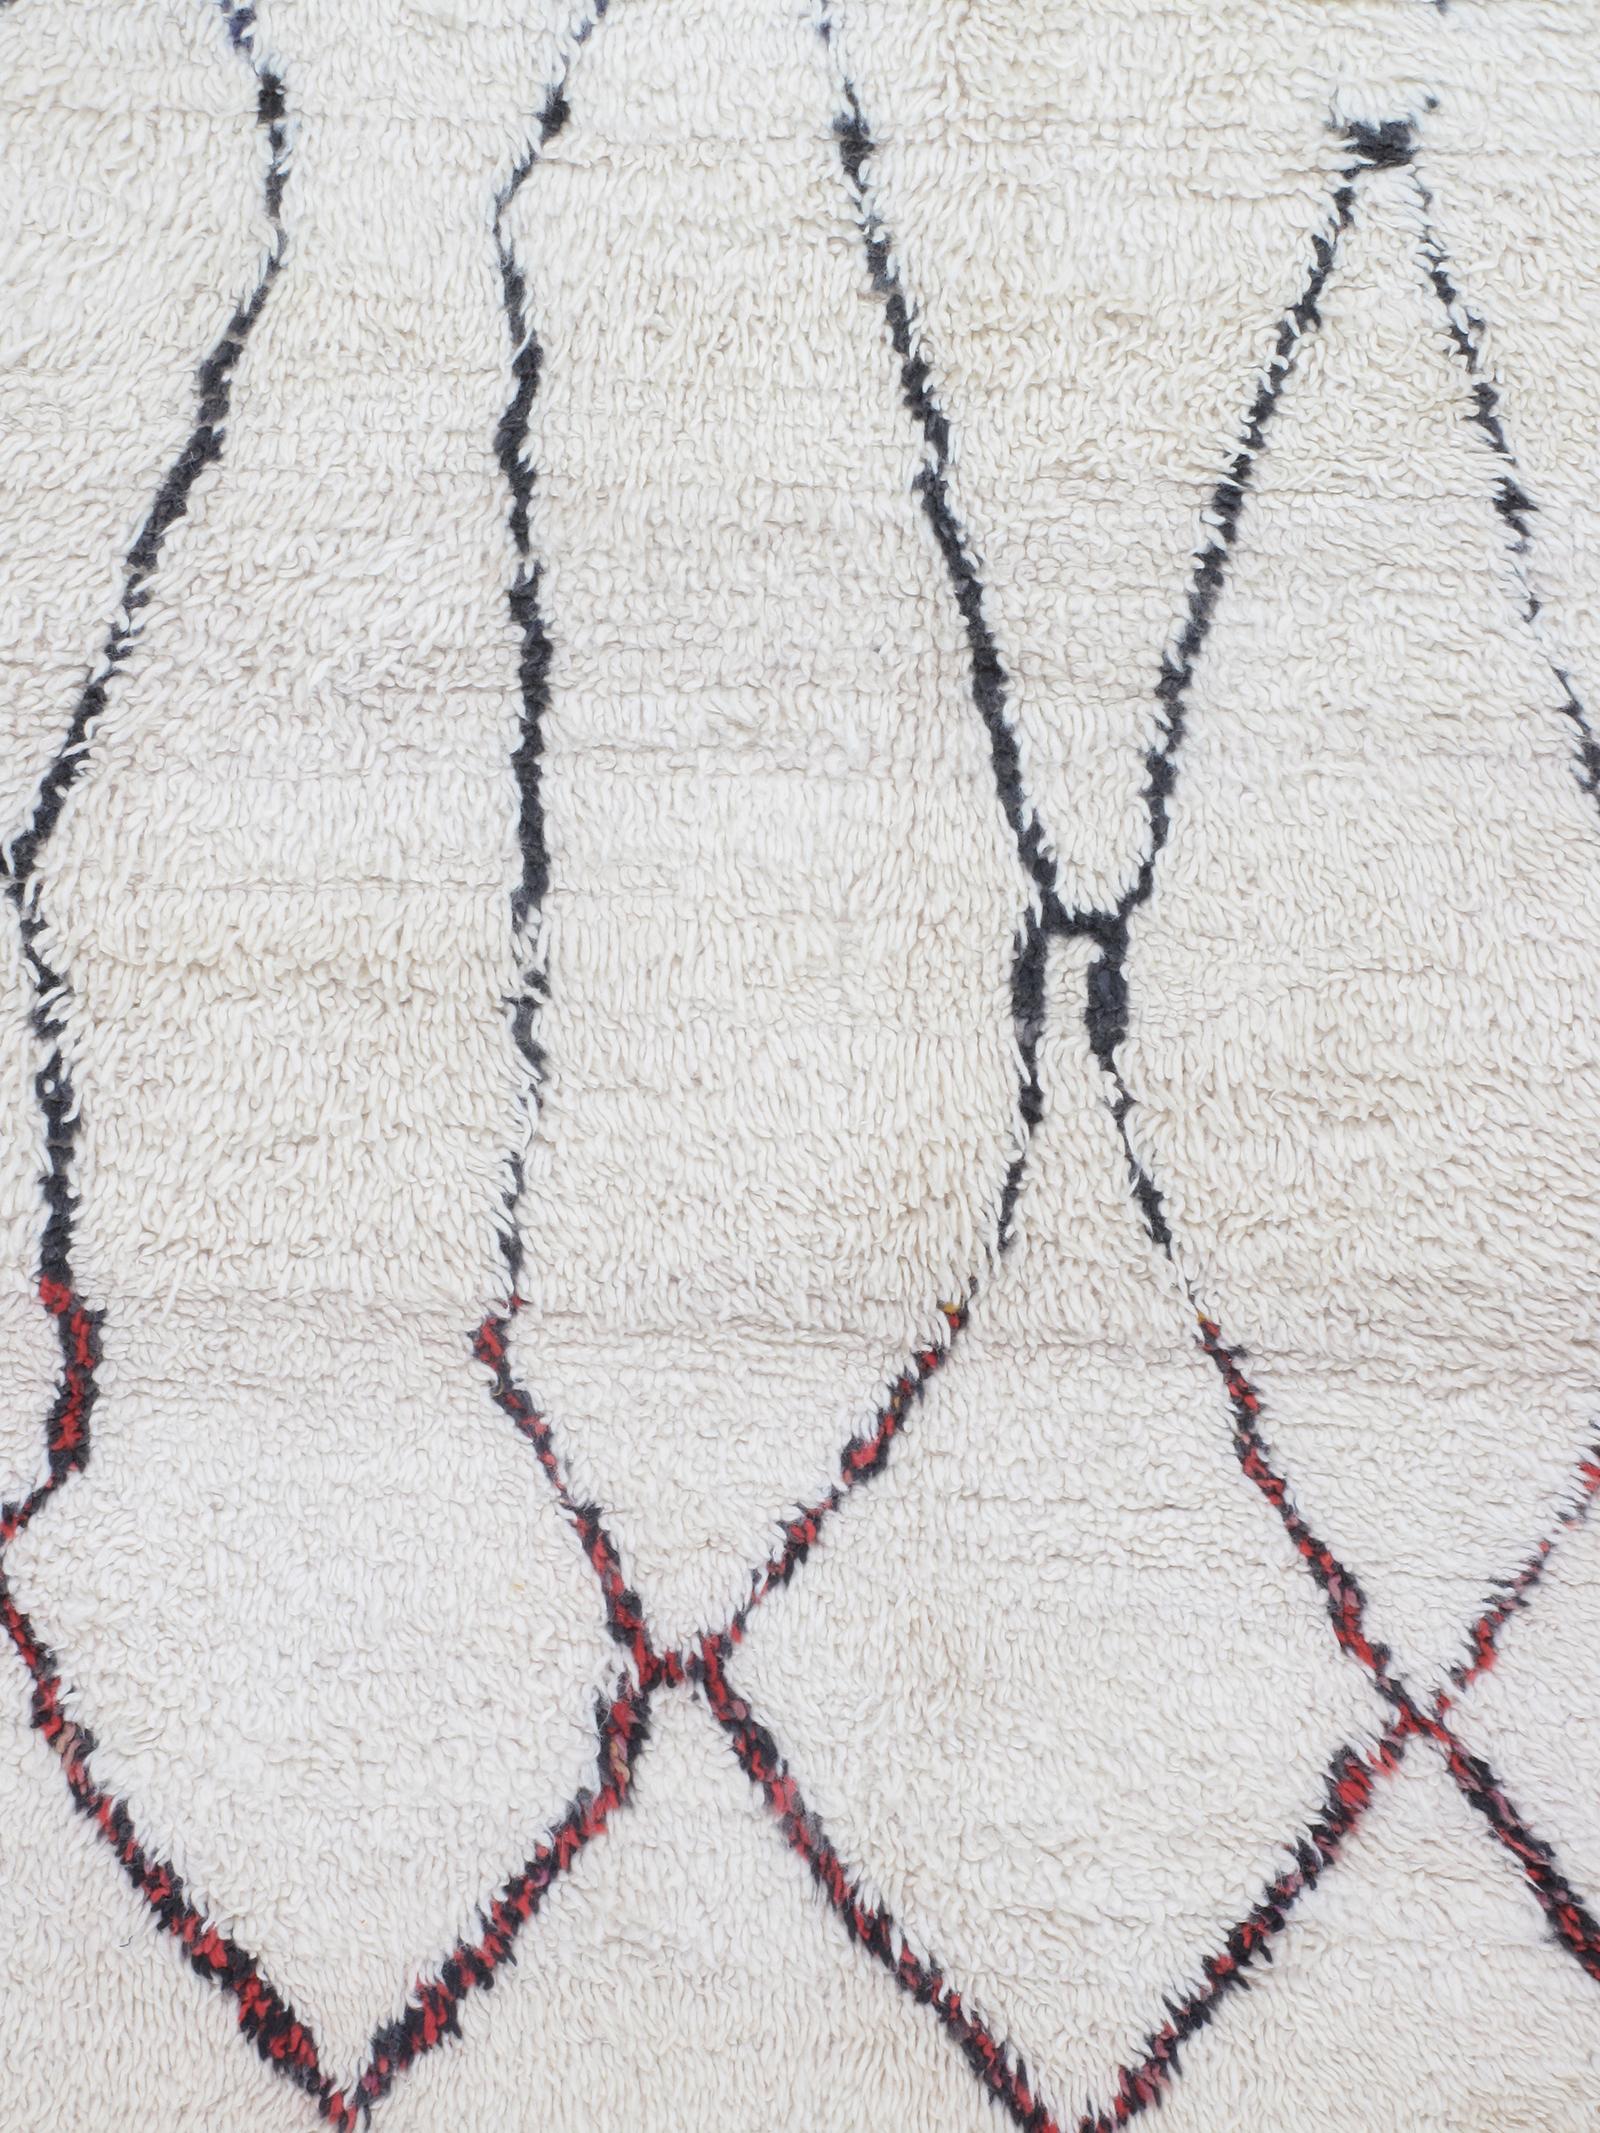 Our vintage Moroccan rugs are part of a skillfully curated collection of rare and unusual designs. They are made of all-natural dyes and 100% handspun wool from the Atlas Mountain region in North Africa. These rugs are all one of kind as they were